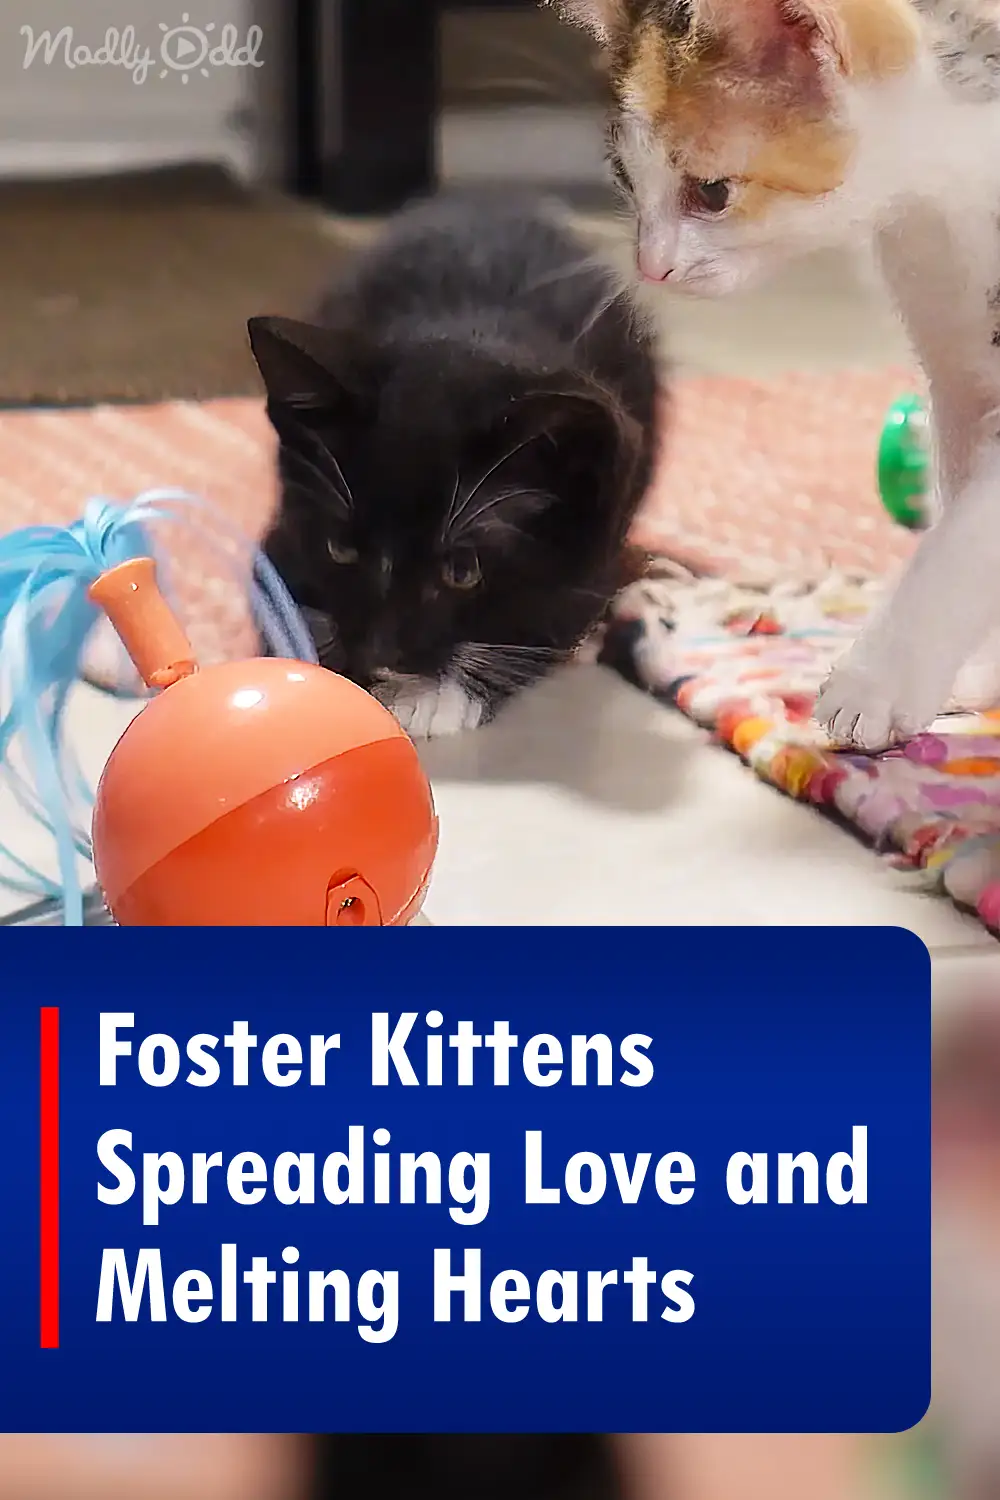 Foster Kittens Spreading Love and Melting Hearts